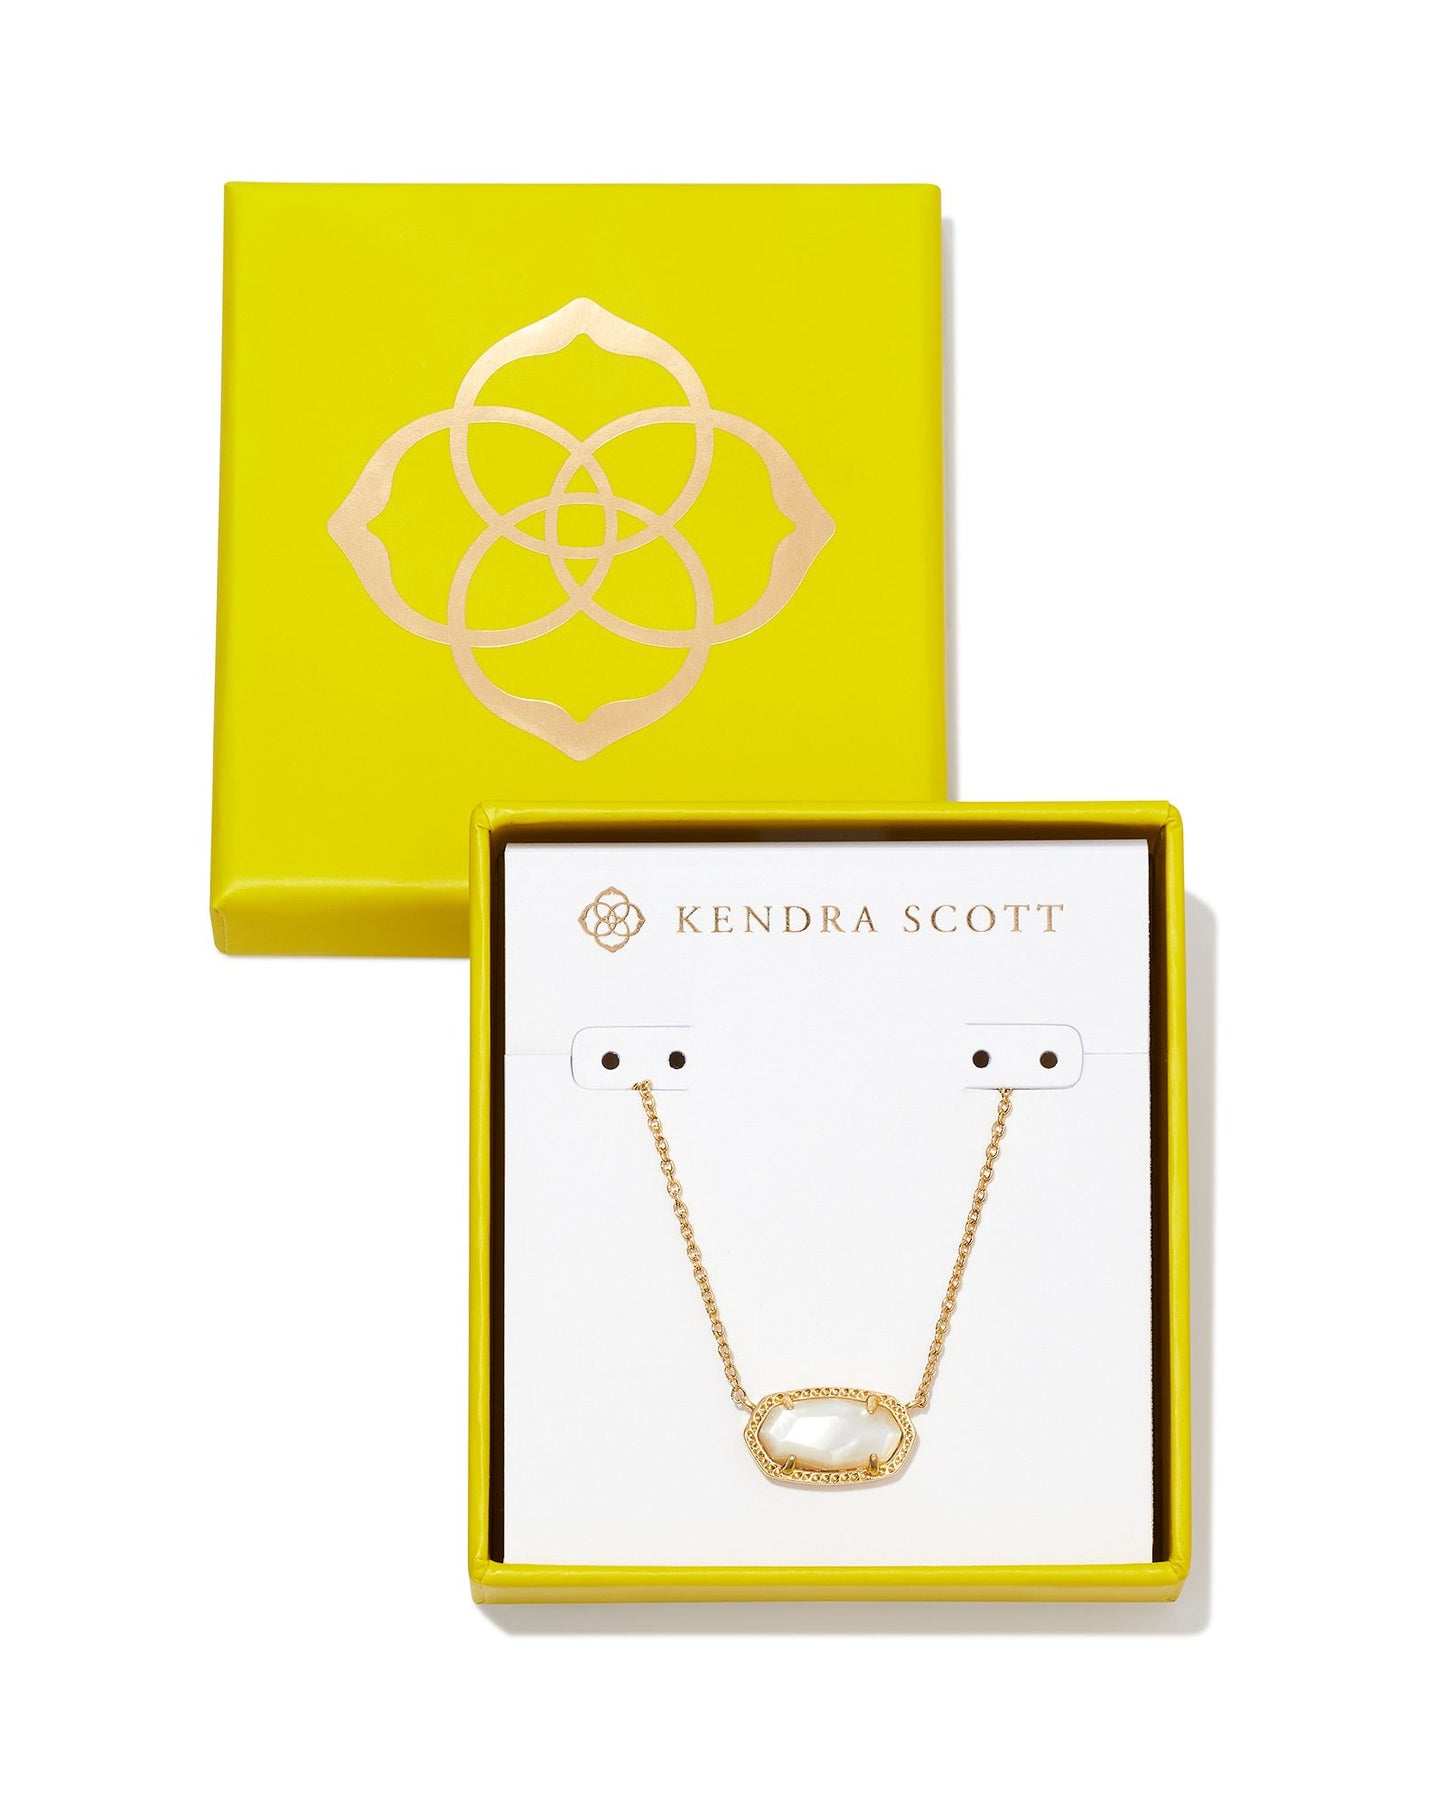 Kendra Scott Elisa Pendant Necklace Boxed Gold Ivory Mother of Pearl-Jewelry Set-Kendra Scott-G00014GLD-The Twisted Chandelier